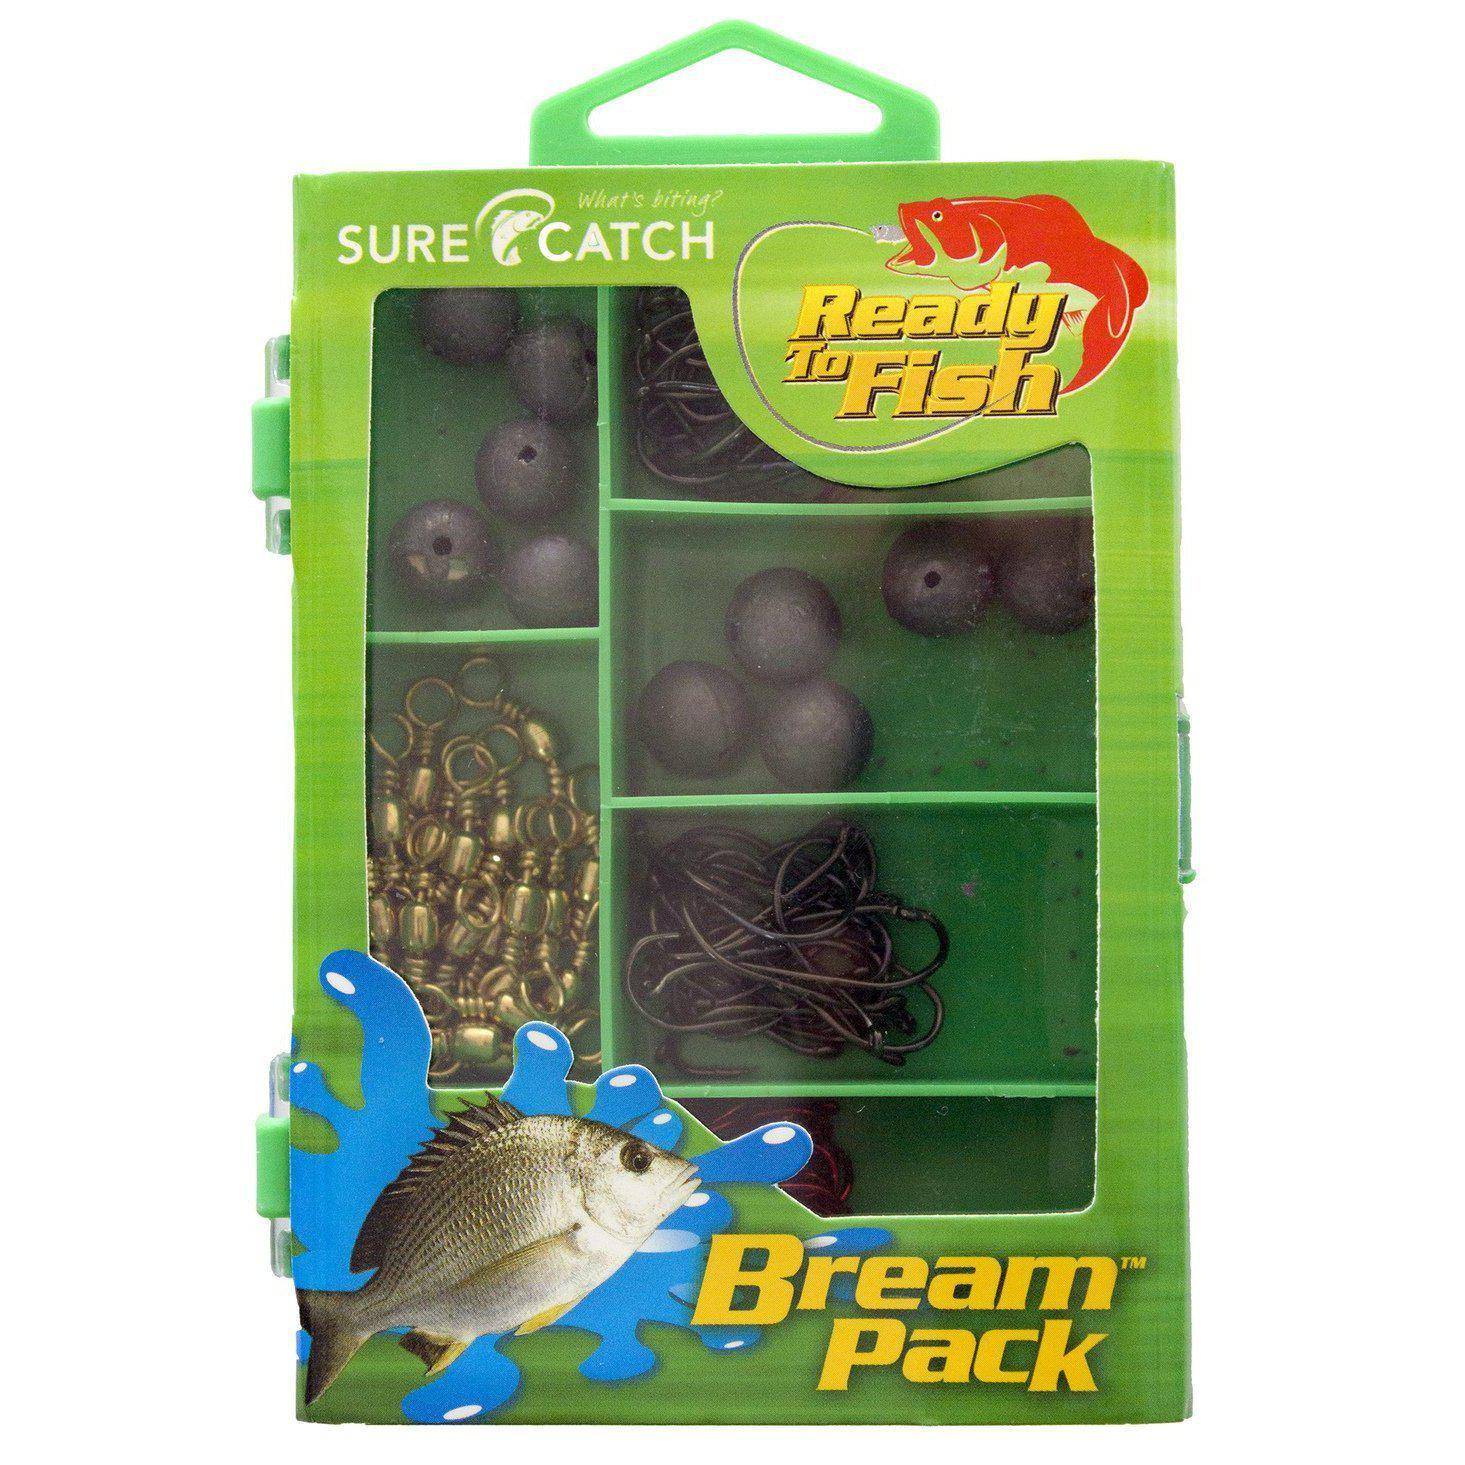 Sure Catch Ready To Fish Pack Bream Tackle Box - Addict Tackle